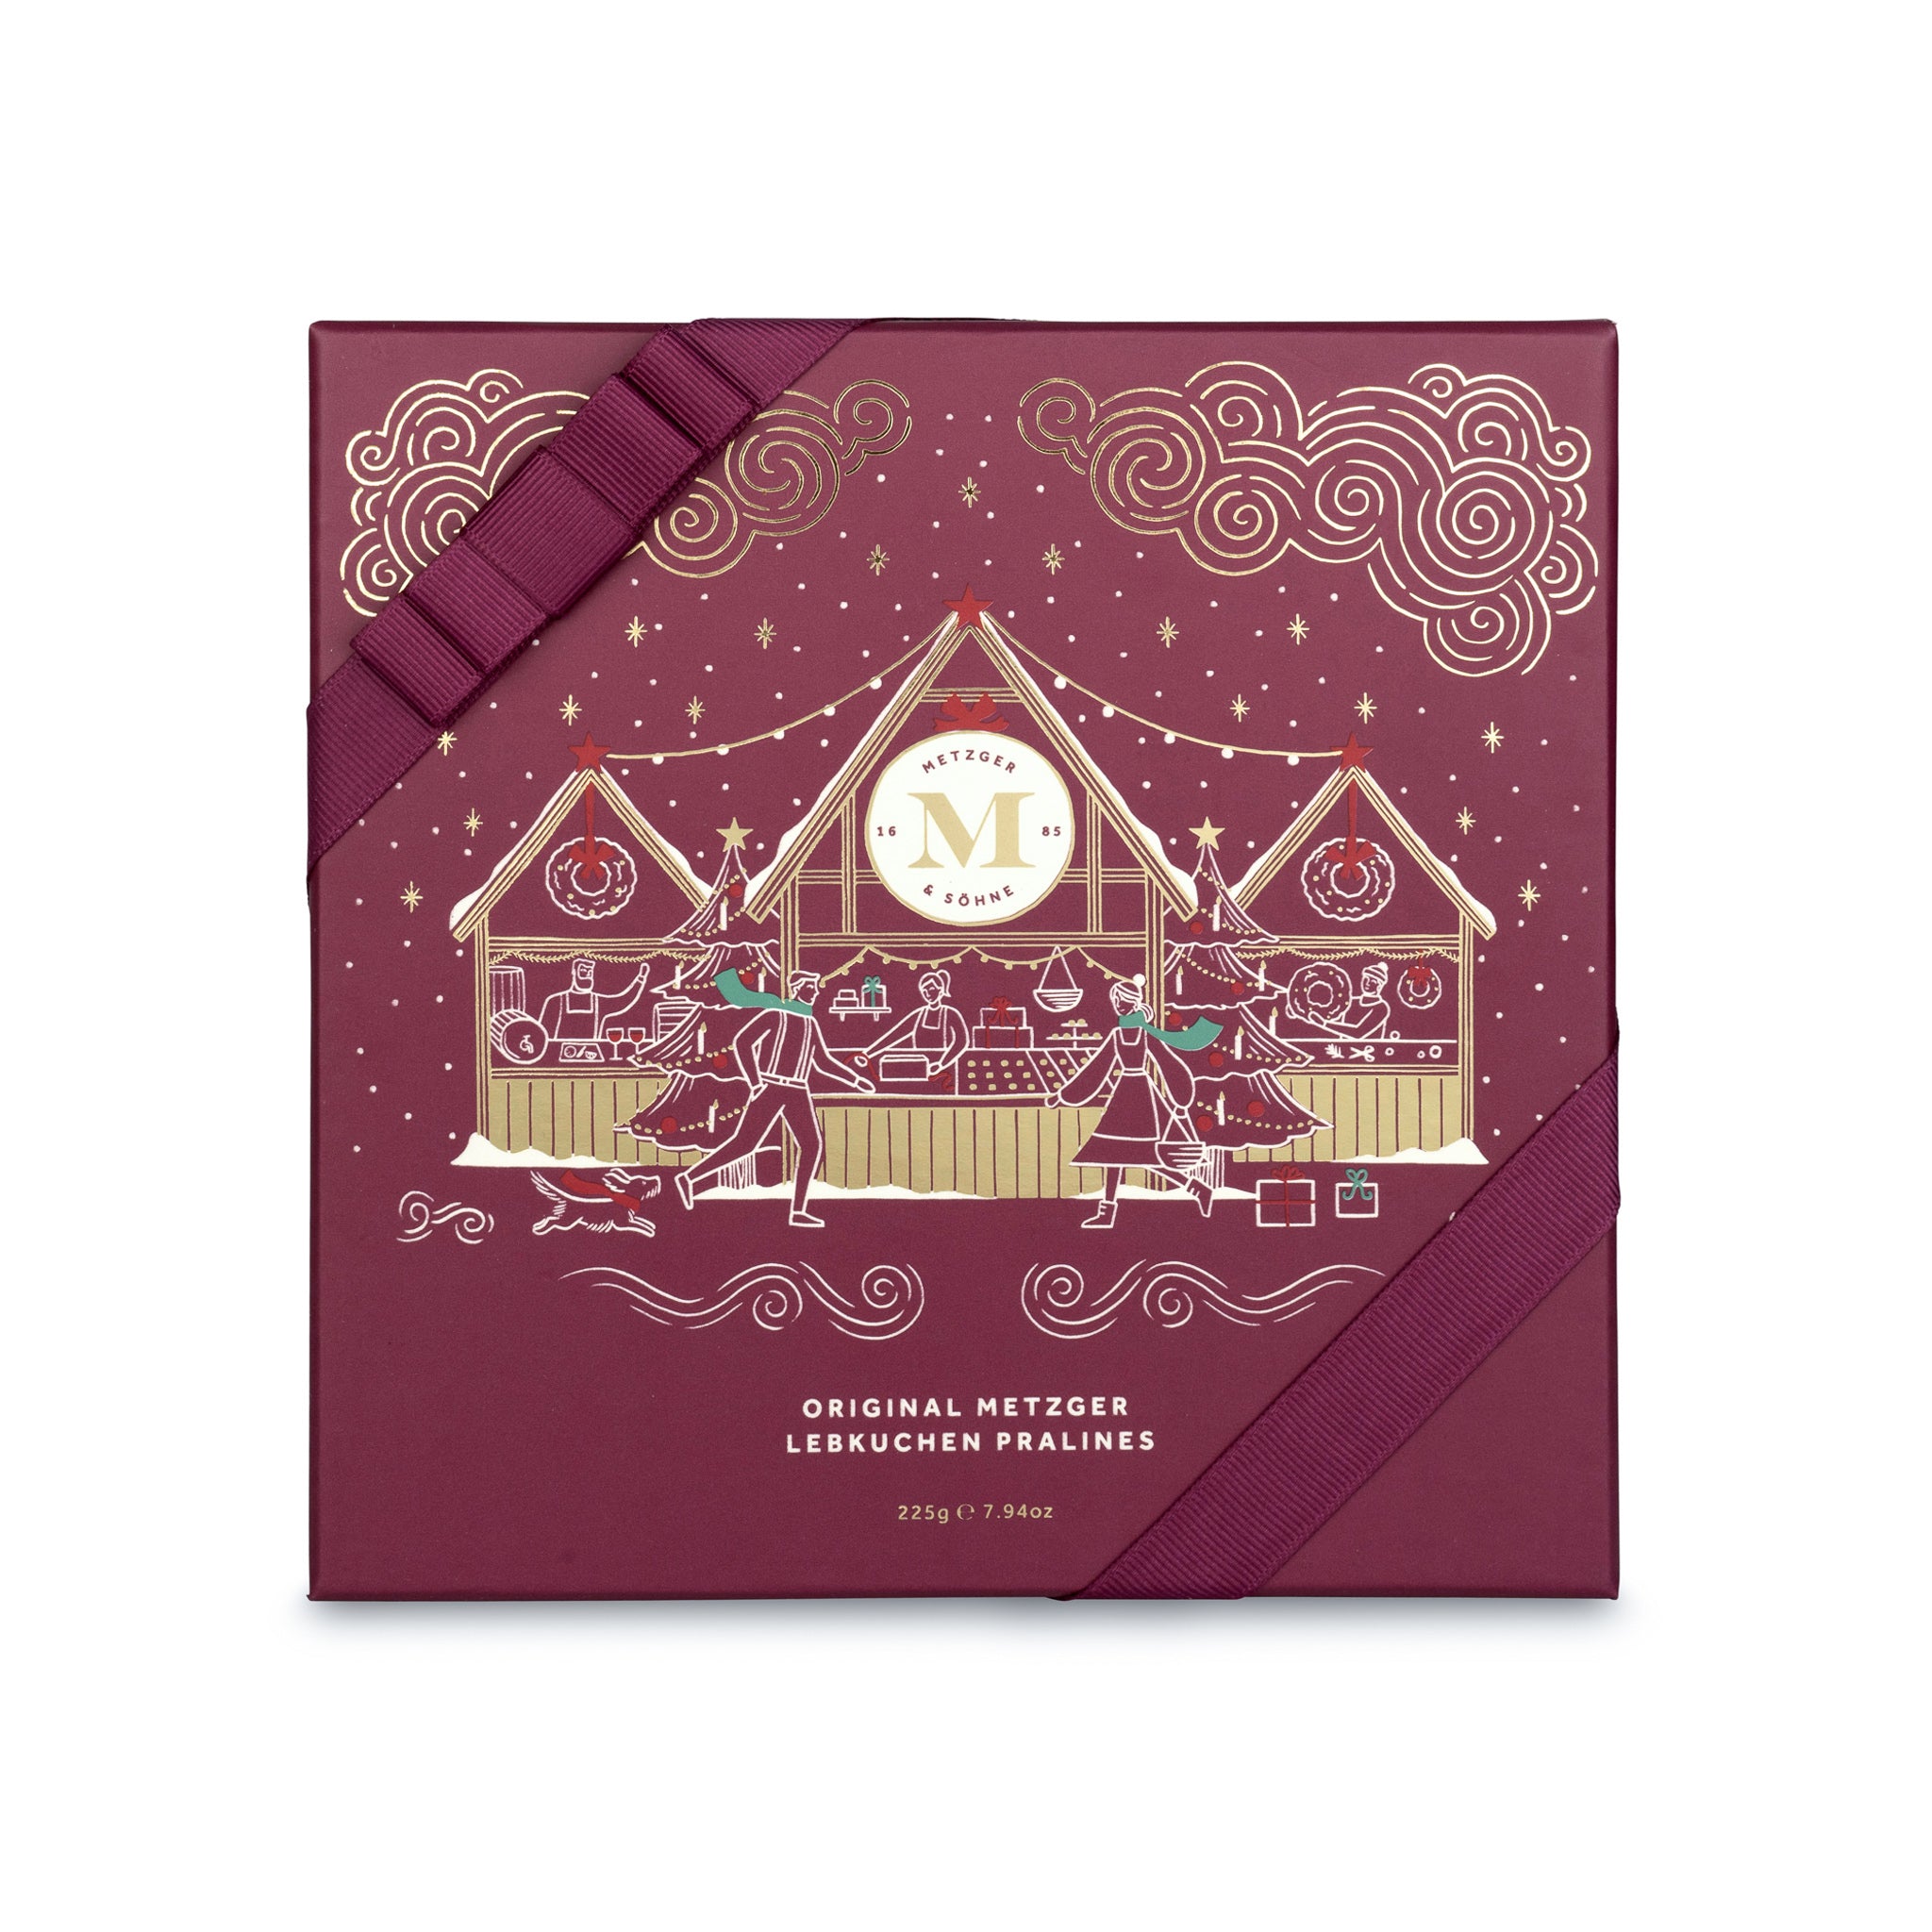 Metzger is pleased to bring you the magic of Viennese Christmas markets with a luxury chocolate box in red, filled with 16 delectable Lebkuchen pralines. Each praline is layered with Lebkuchen 'honey cake' and filled with marzipan, nuts or fruit jams and jellies, encased in rich chocolate. Suitable for vegetarians.